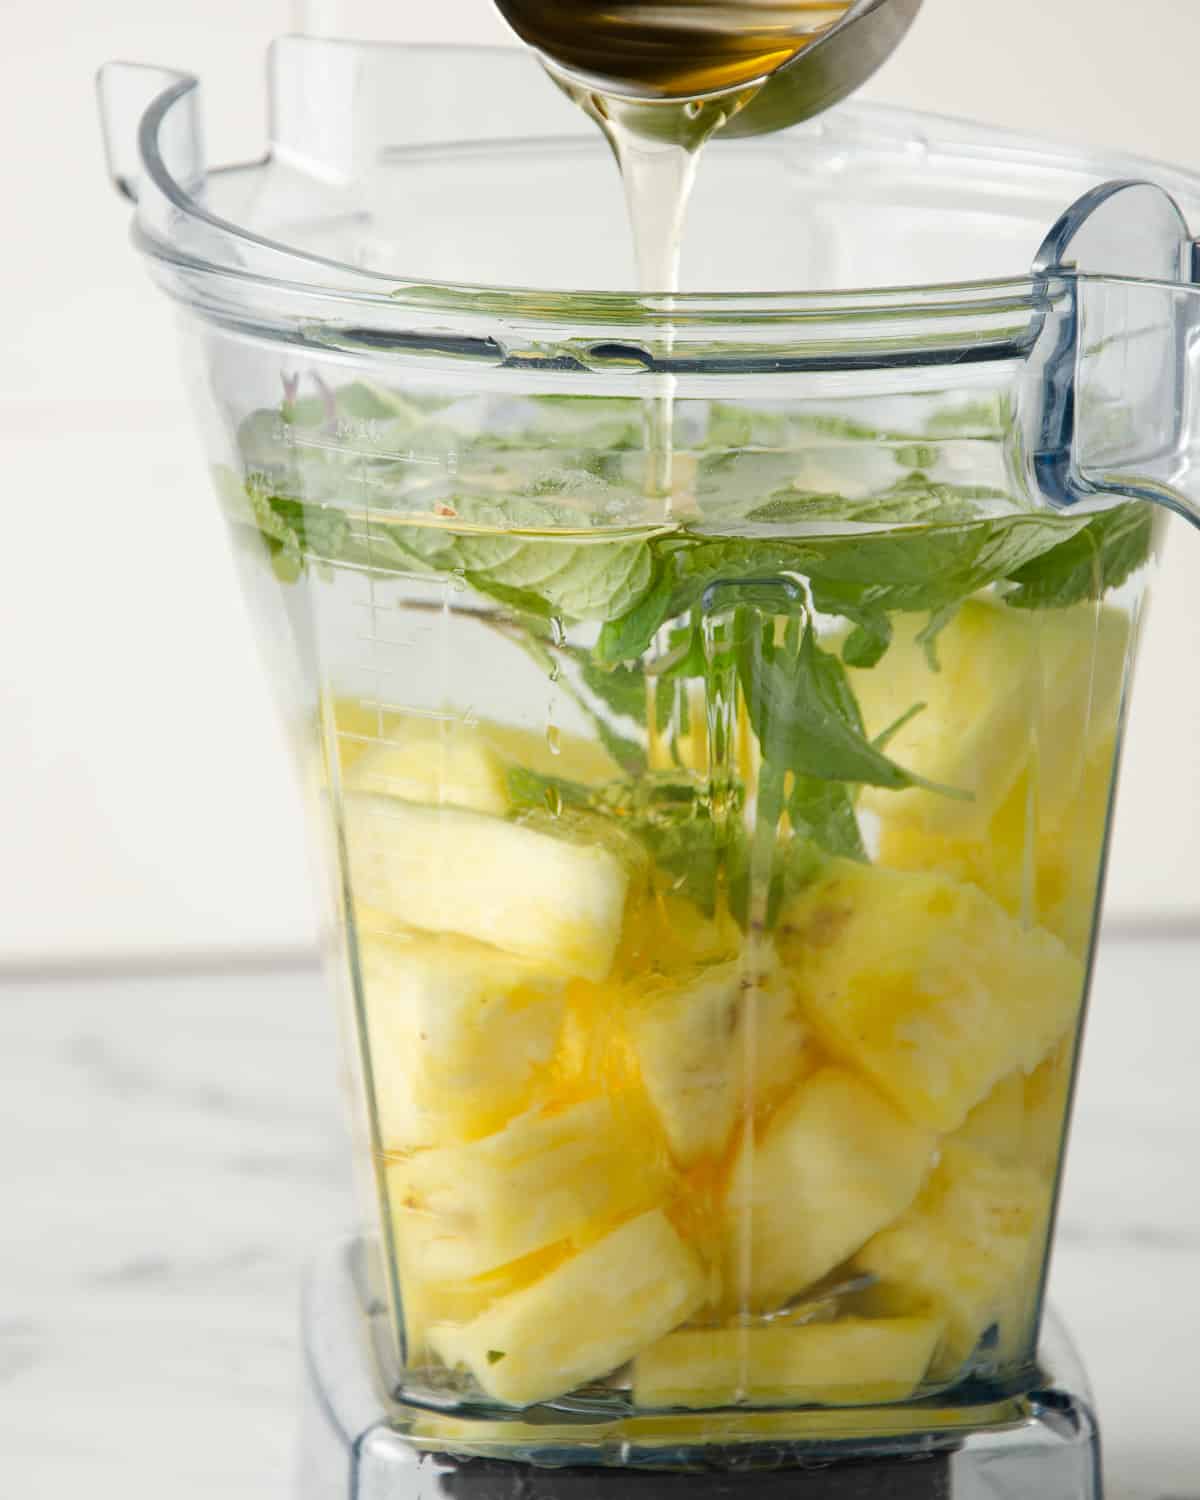 Pouring agave nectar into a blender filled with pineapple, water and mint.